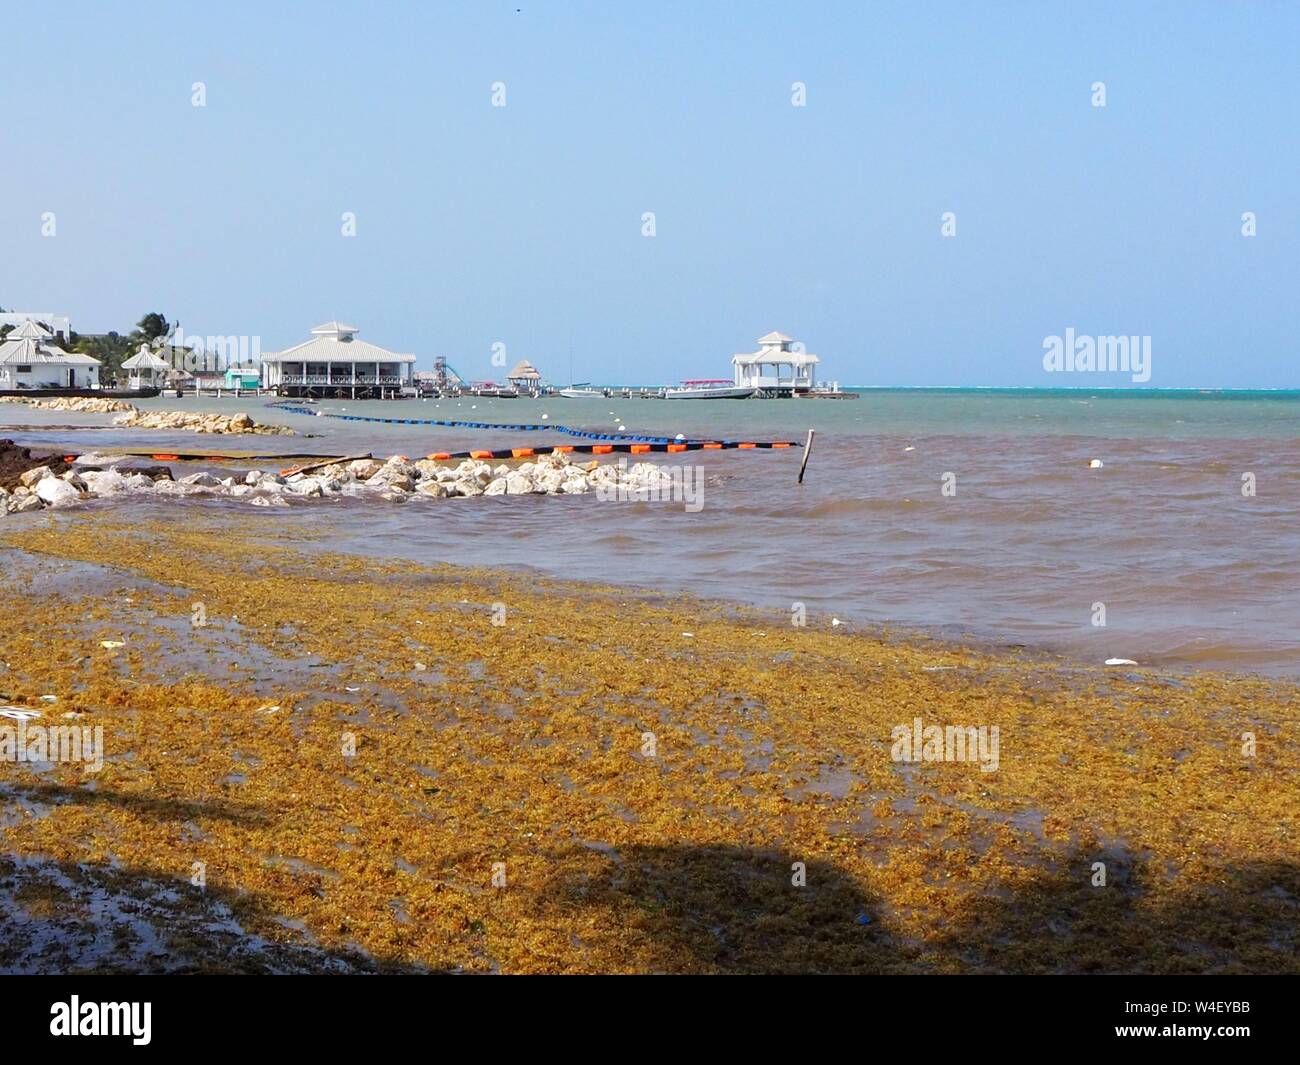 Rotting sargassum sea weed on the beach in the Caribbean. Stock Photo